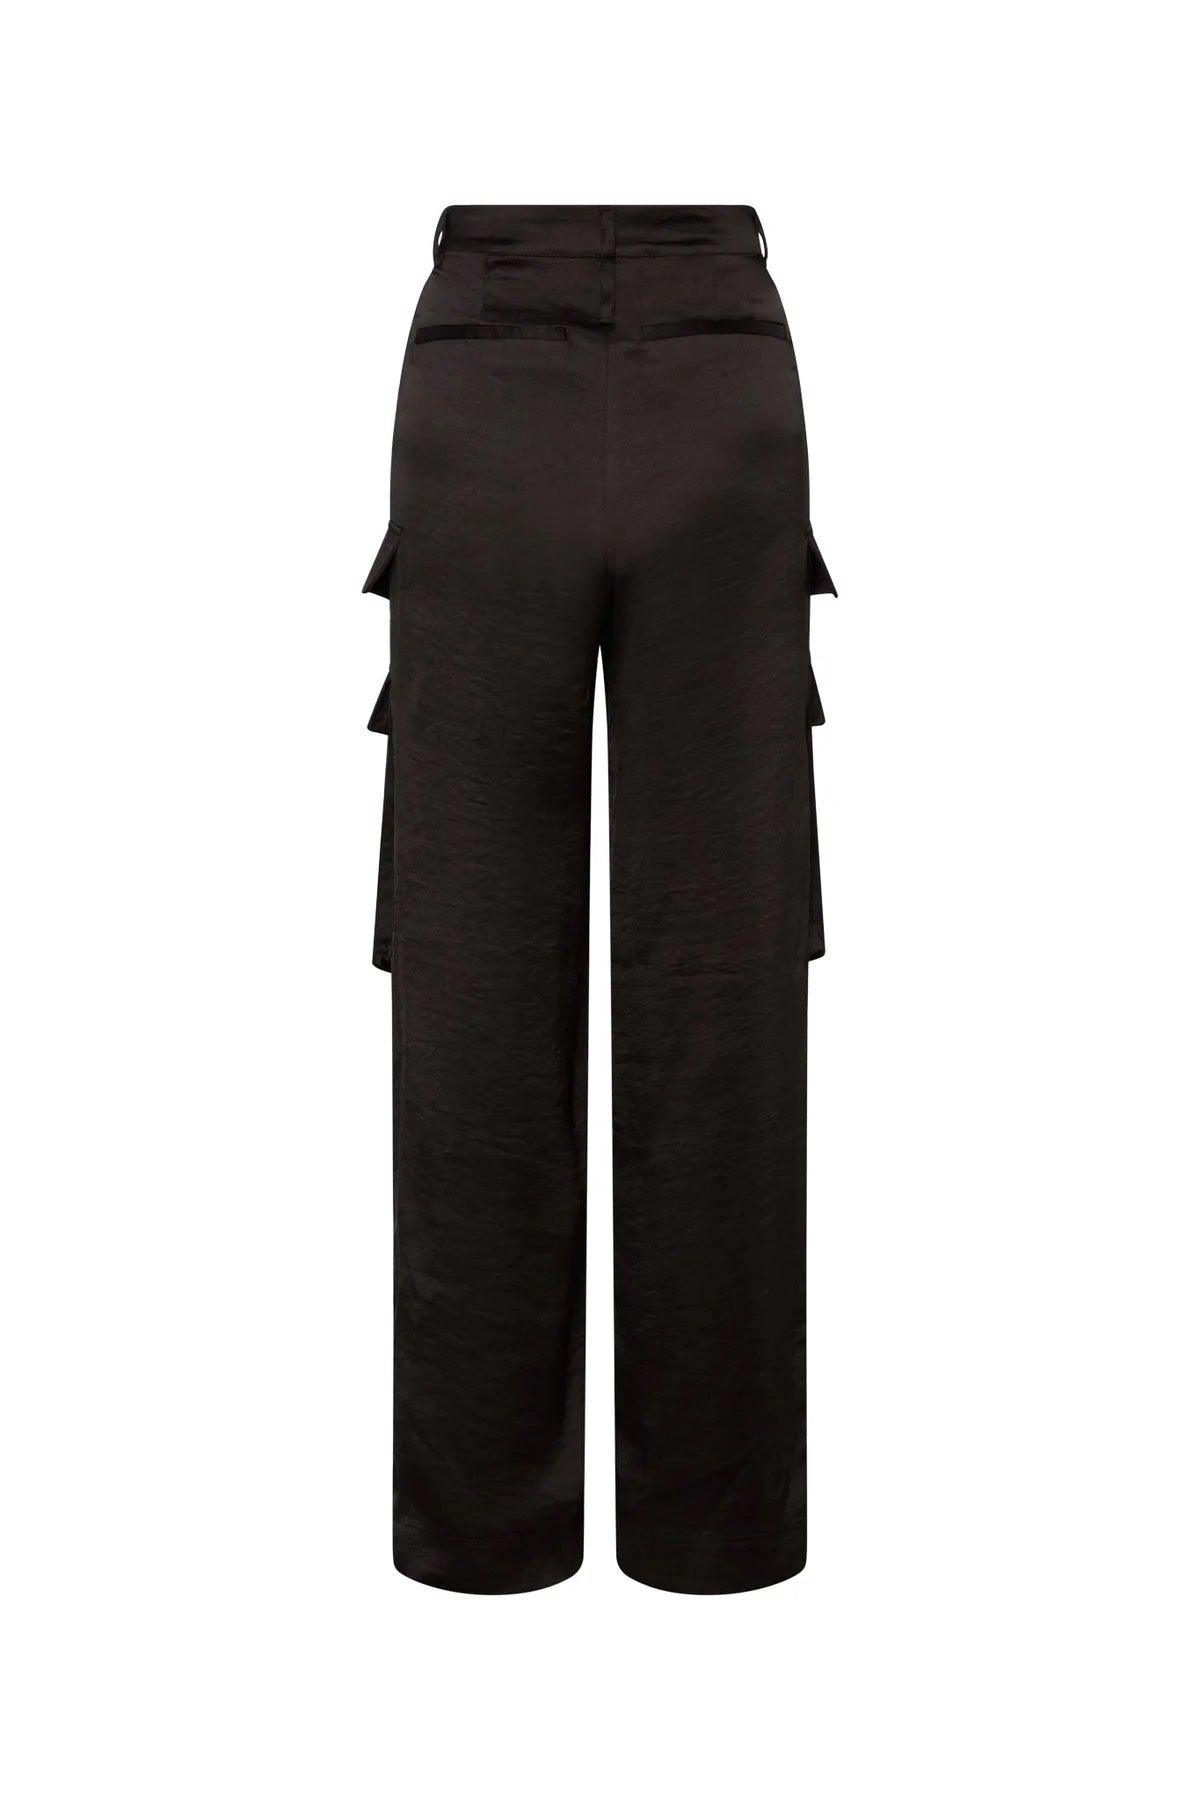 Black Cargo Pant by Catherine Gee